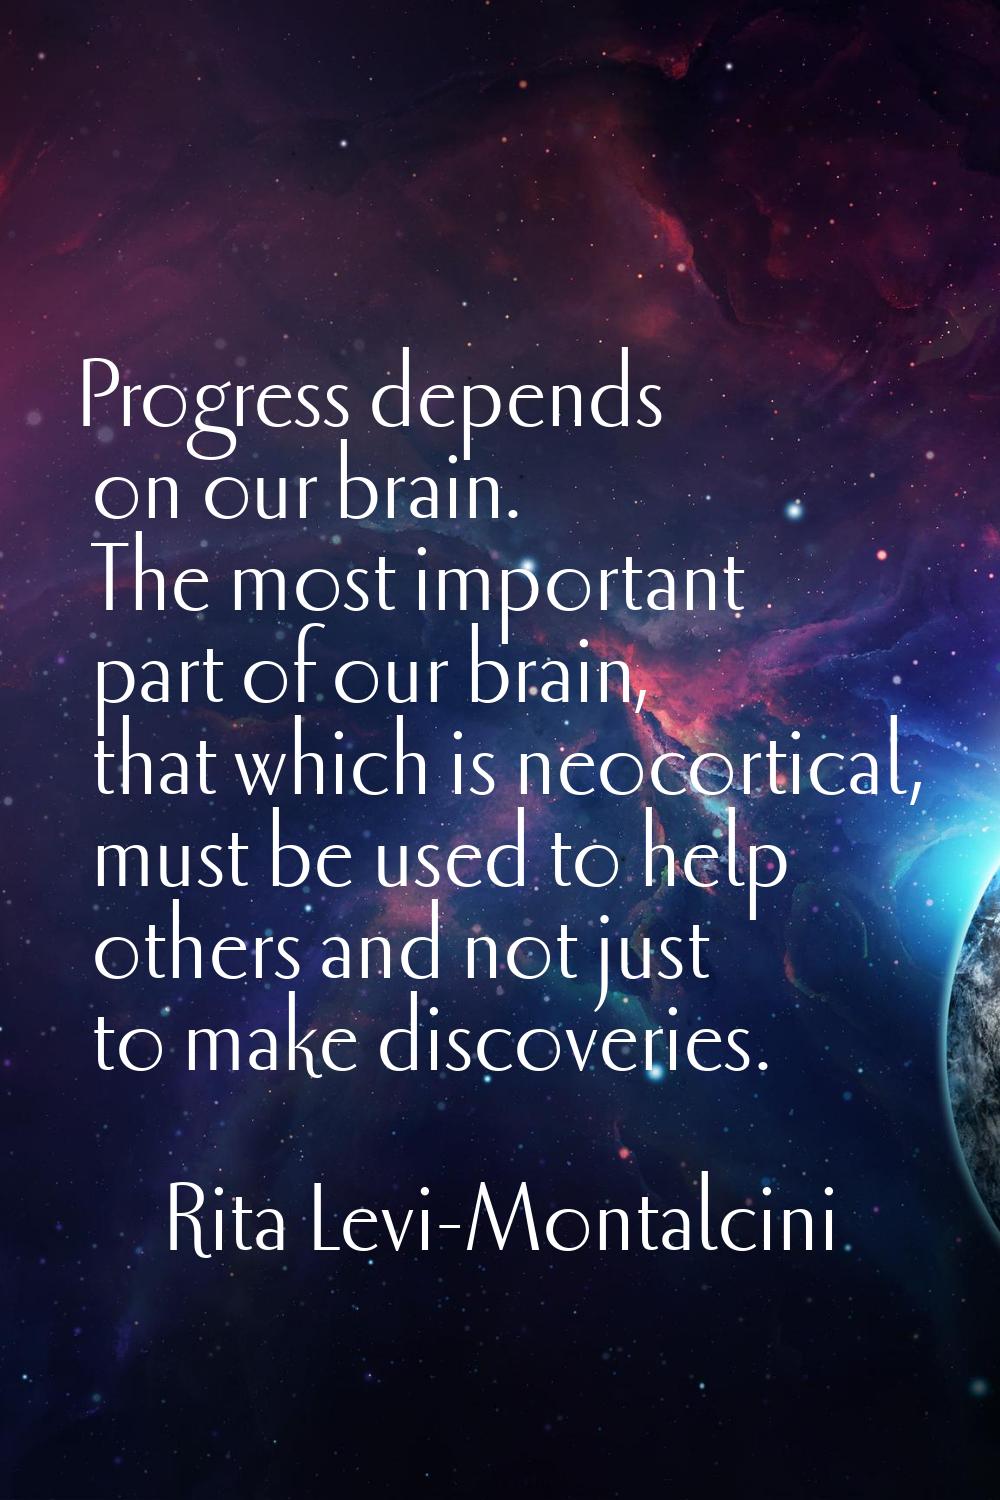 Progress depends on our brain. The most important part of our brain, that which is neocortical, mus